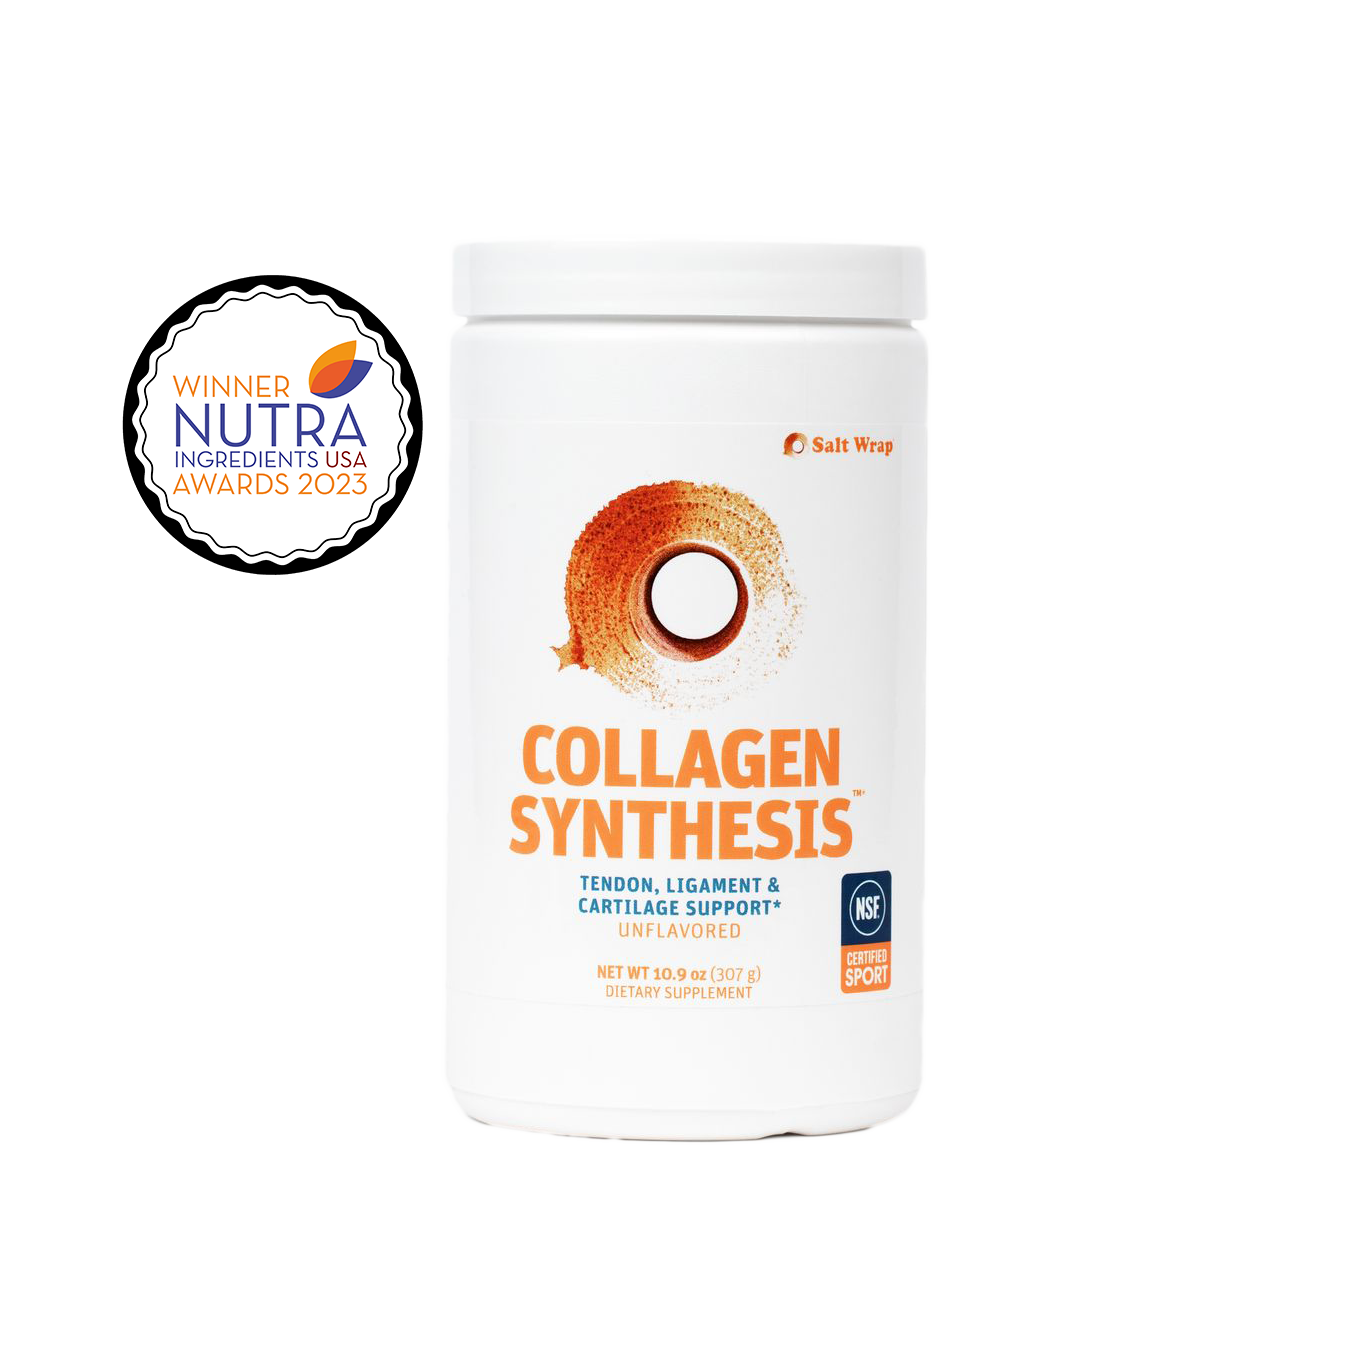 Collagen Synthesis™ is the award-winning, joint-building collagen that physical therapists and elite athletes count on to keep their joints strong, mobile, and resilient.